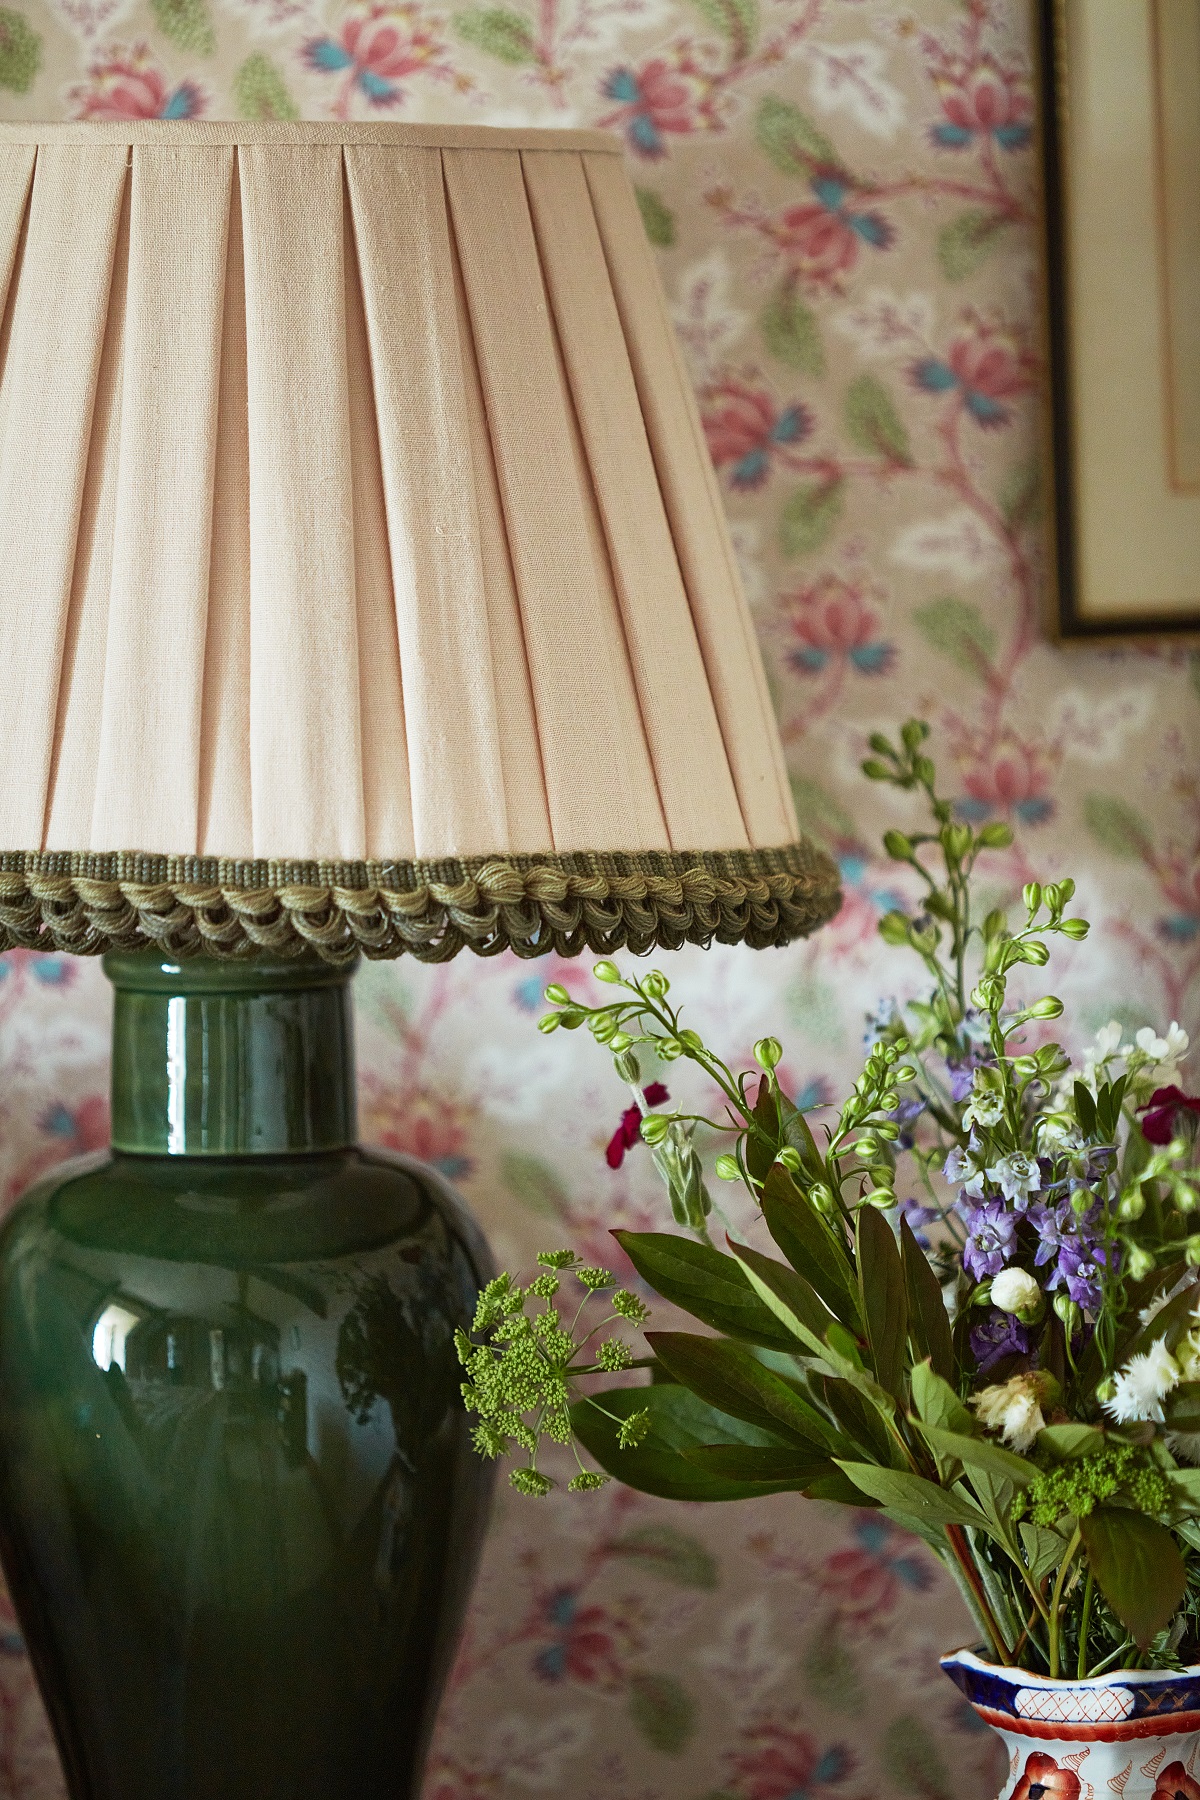 lampshade edged with green trim in front of floral wallpaper and vase of flowers